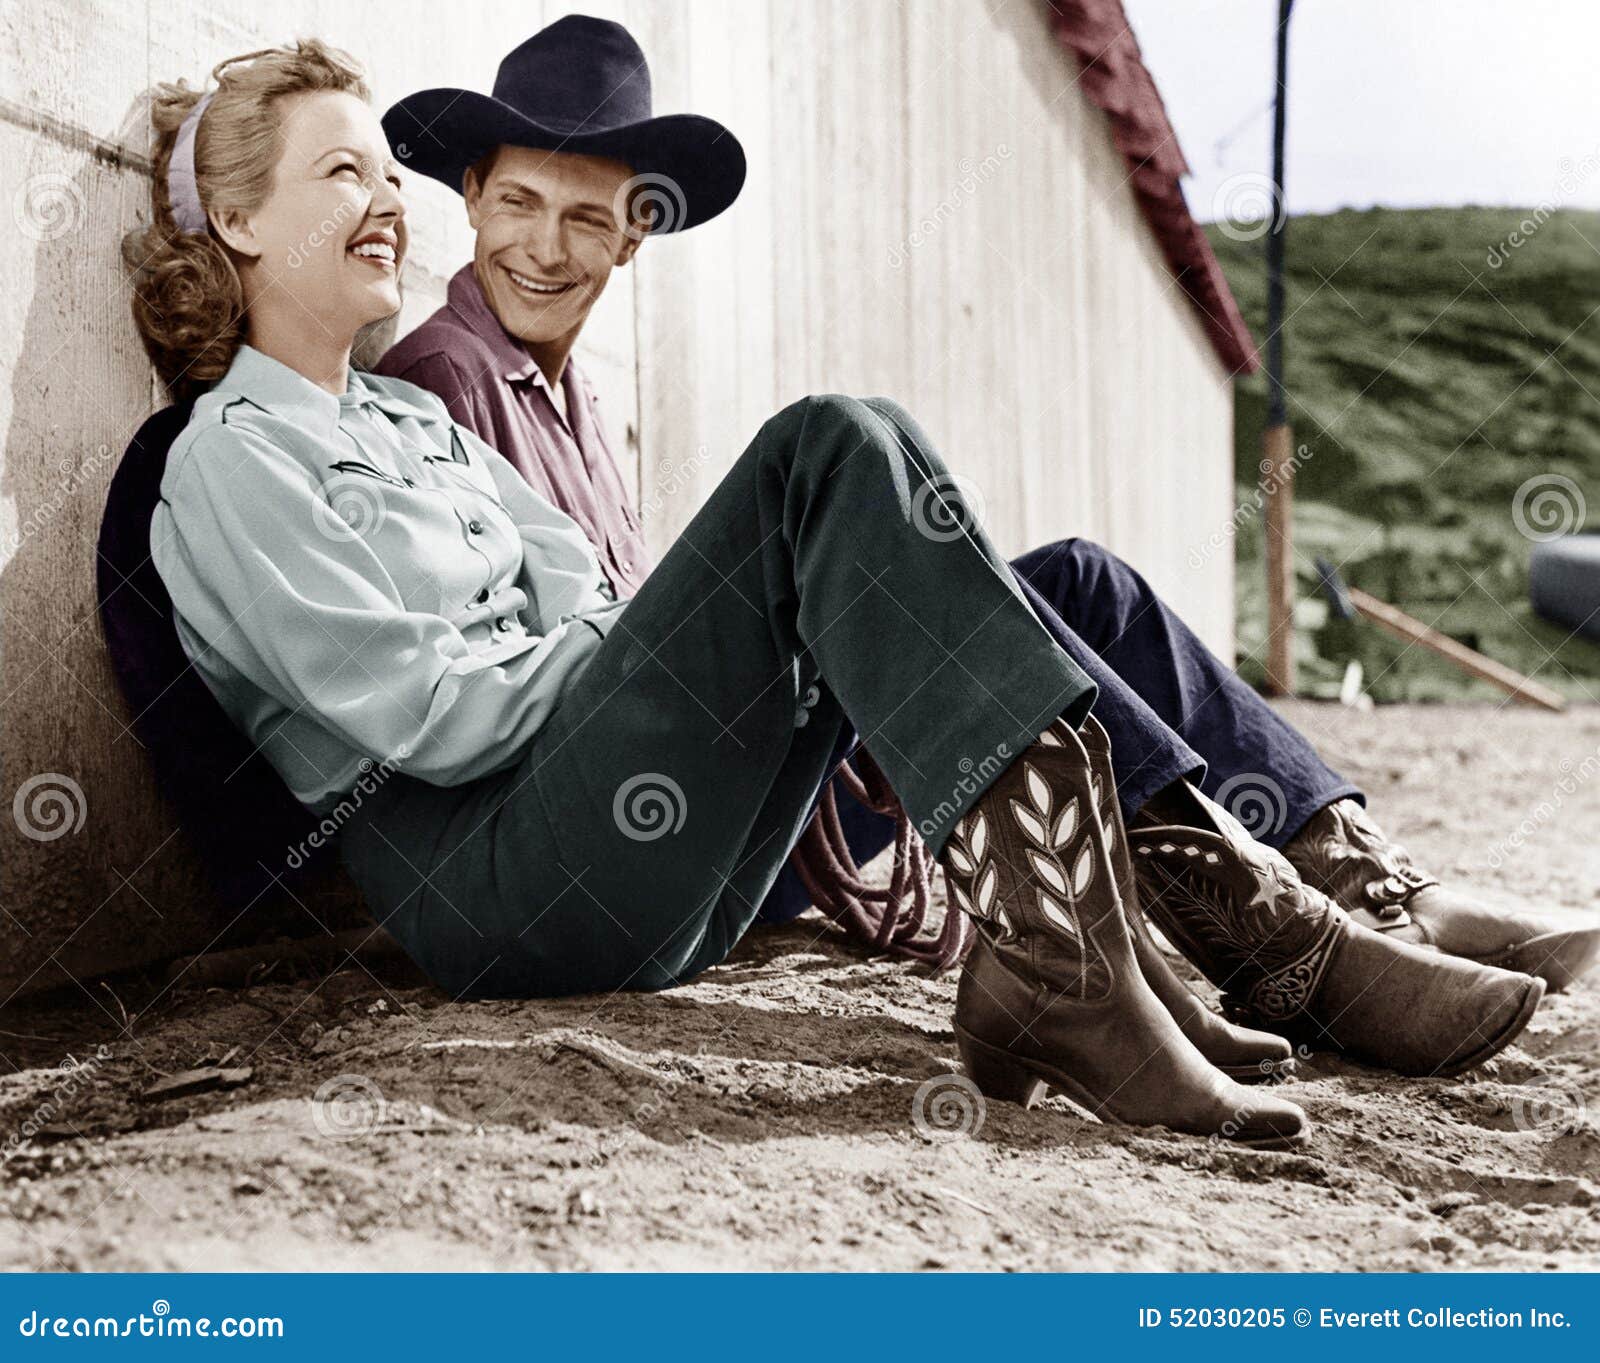 laughing couple in western attire sitting on the ground